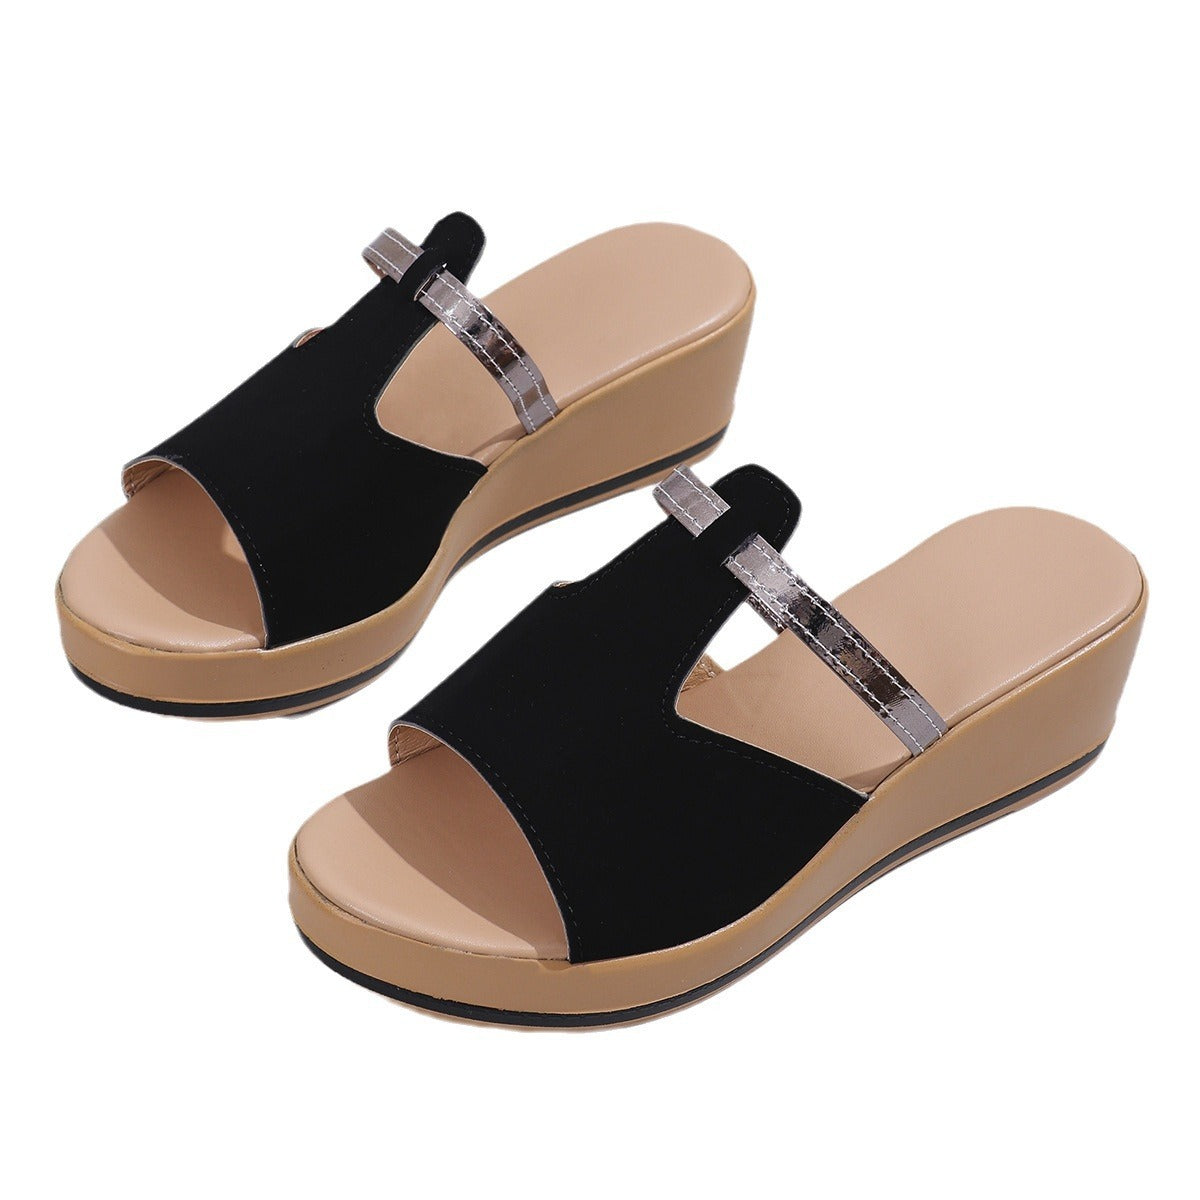 Summer Peep-toe Wedges Sandals Casual Thick Sole Heightening Slippers Fashion Outdoor Slides Shoes Women Accessories for women